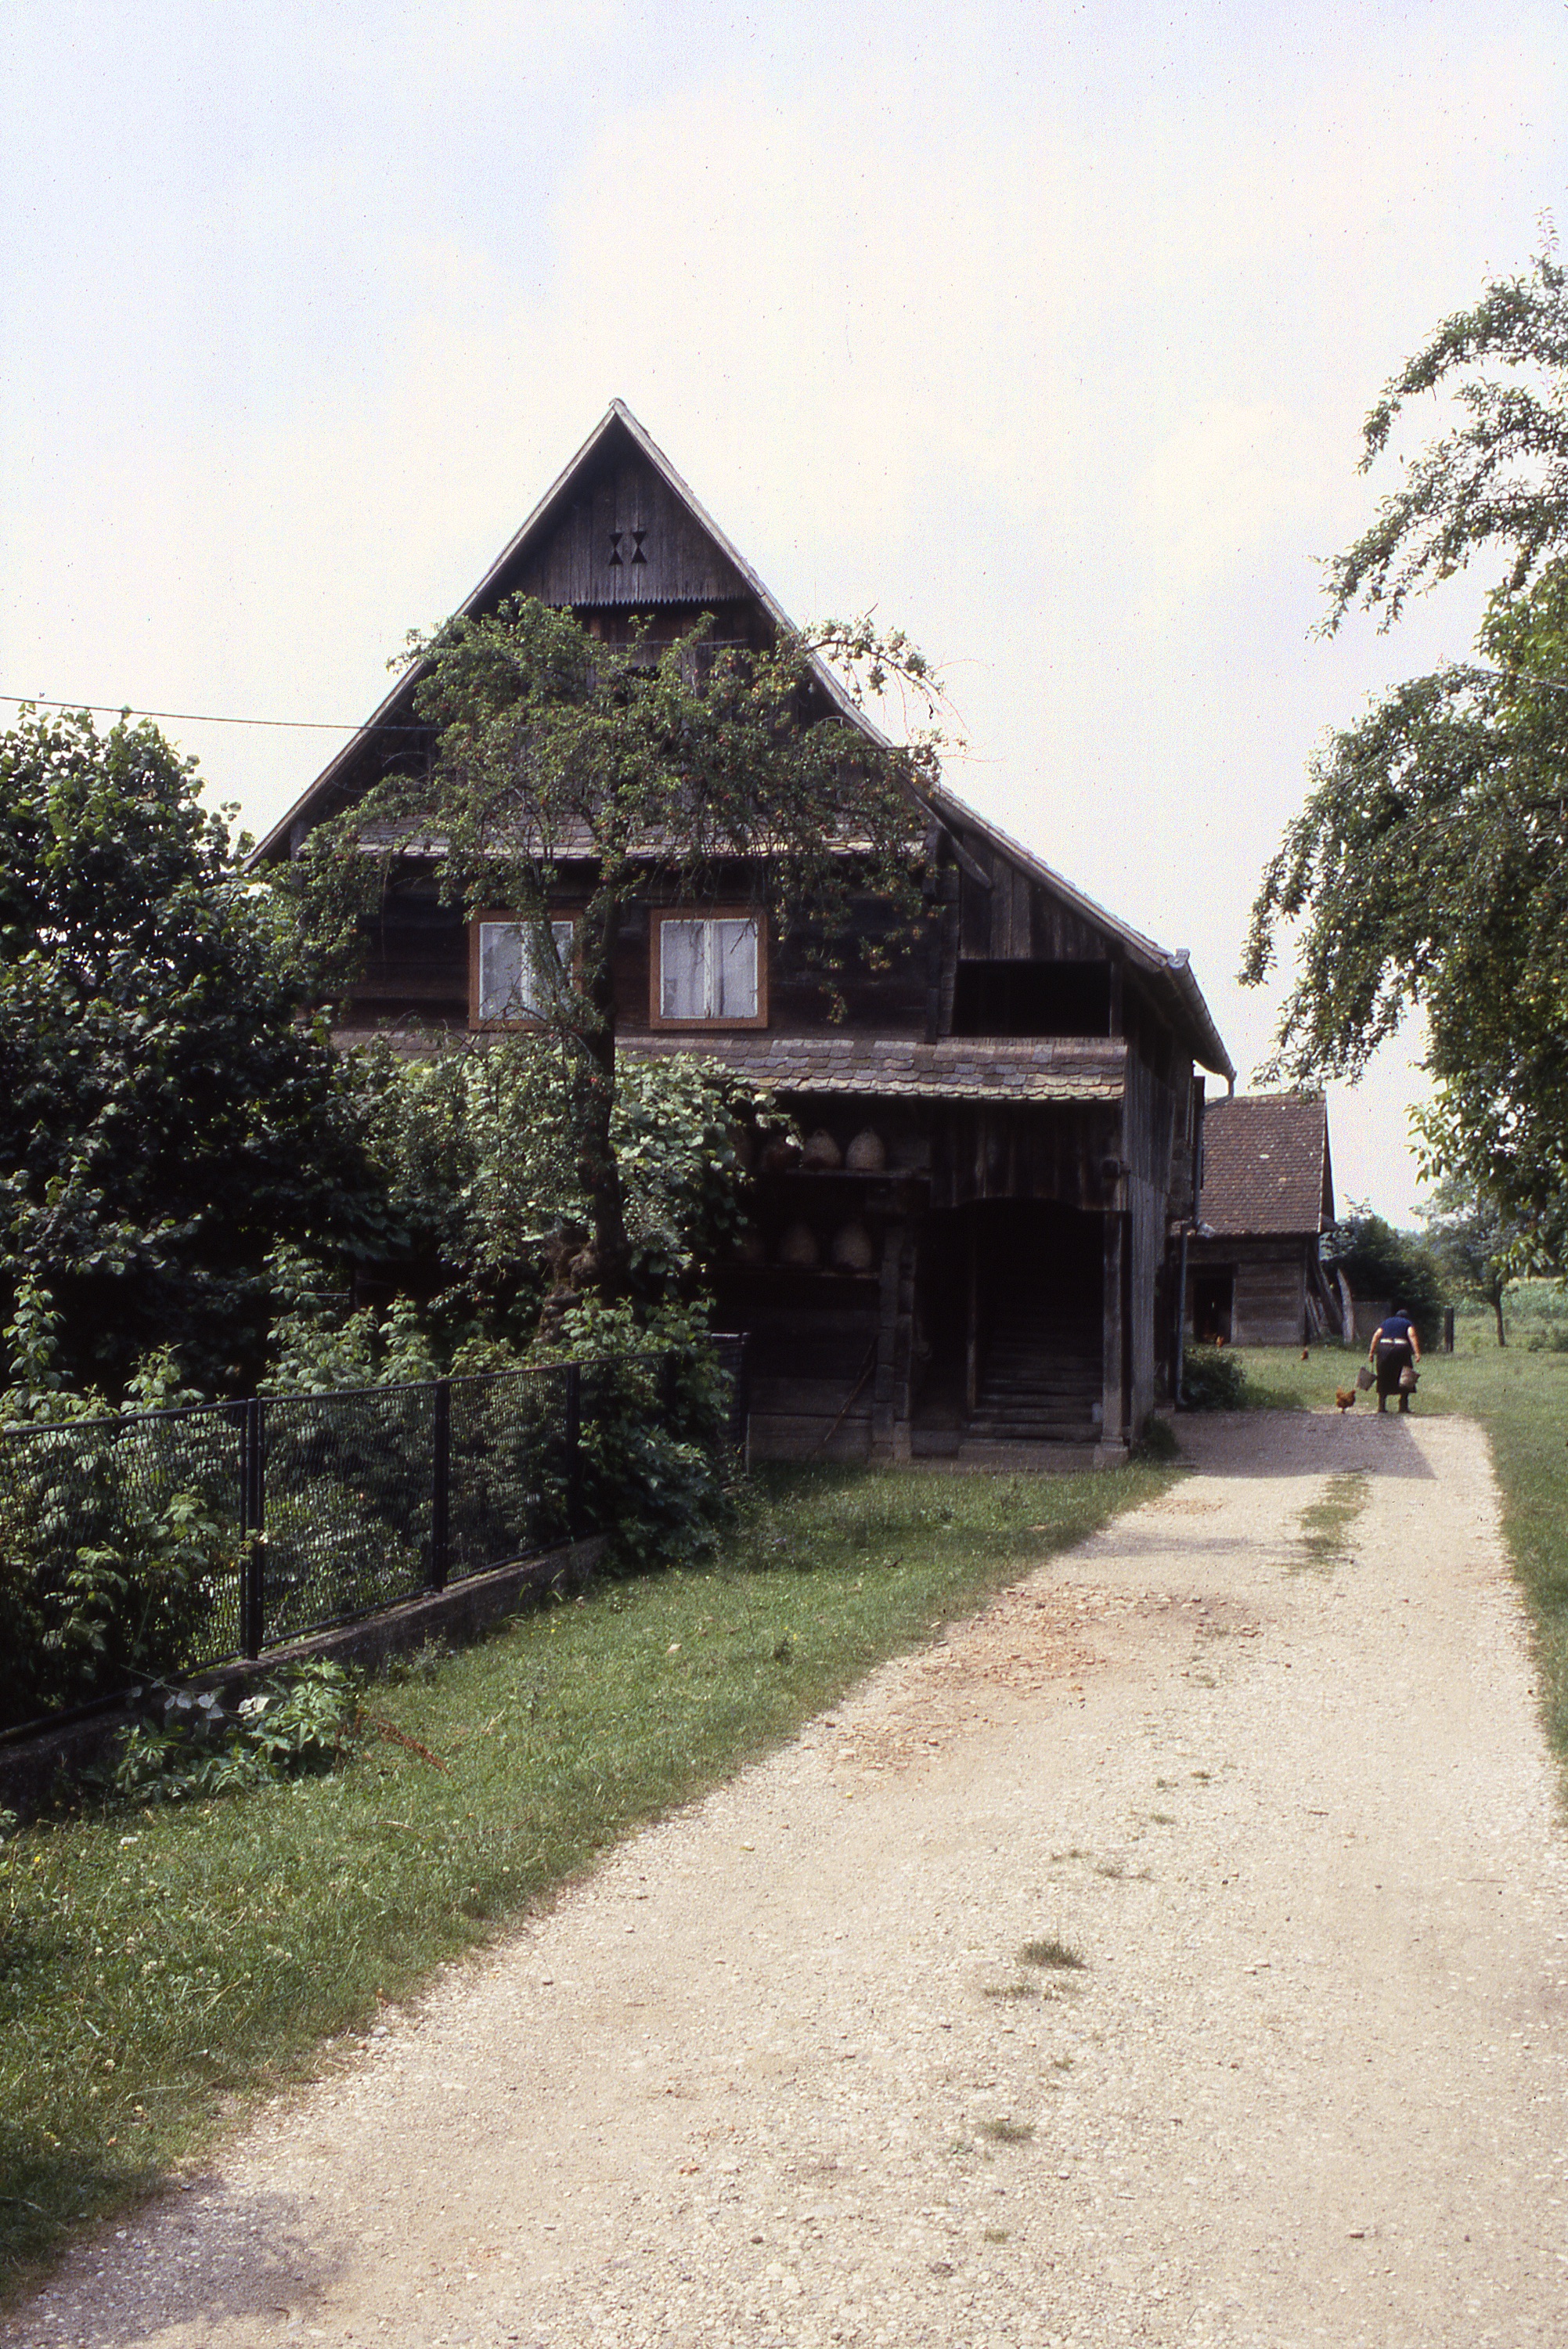 <p>This wooden plank house of the regional čardak/katnica type is located in the village of Gušče, on the Sava River below the city of Sisak. It is positioned perpendicular to the river, with fields for planting located behind the house.</p><p>The house is entered by the open stair along the side. Living spaces are on the upper floor, with the principal room facing the river. The ground level interior spaces are typically used to house animals, store produce, farm tools and equipment. The elderly woman who owned and maintained this farm reported, in 1988, that the house was over 200 years old. (photo 1988)</p>